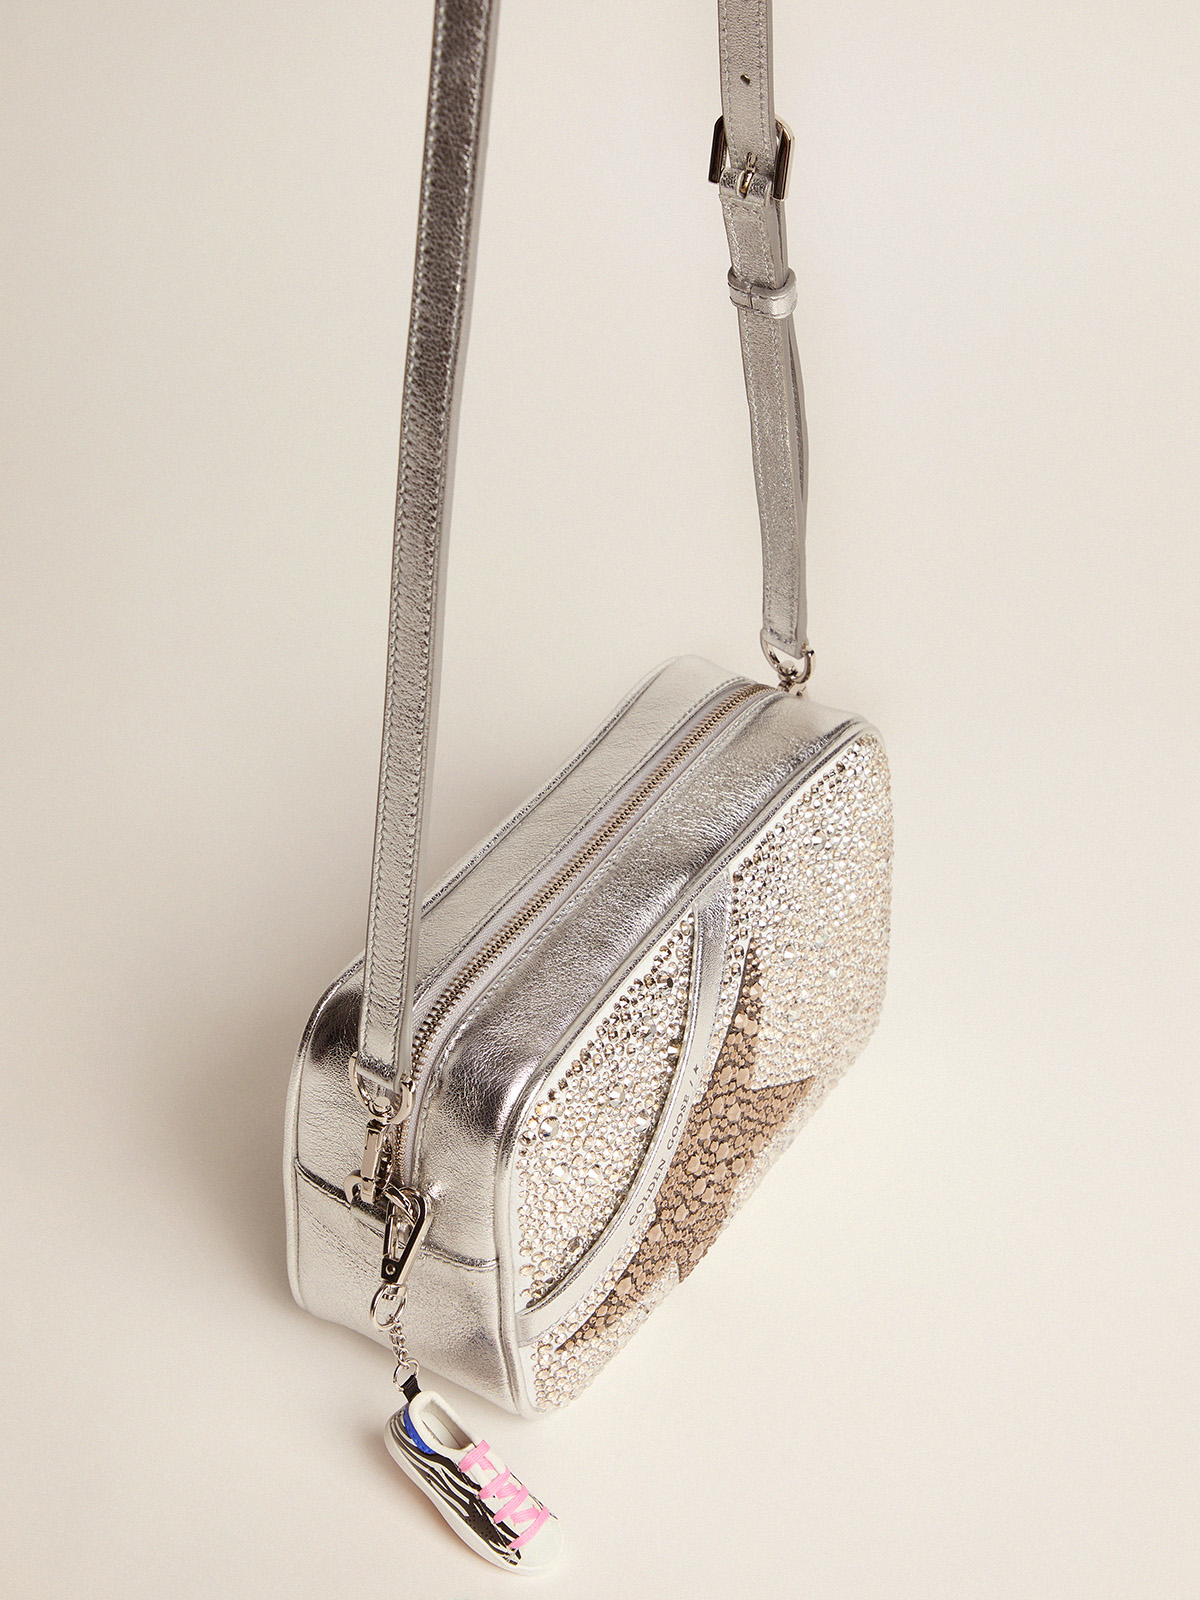 Star Bag made of laminated leather with Swarovski crystals